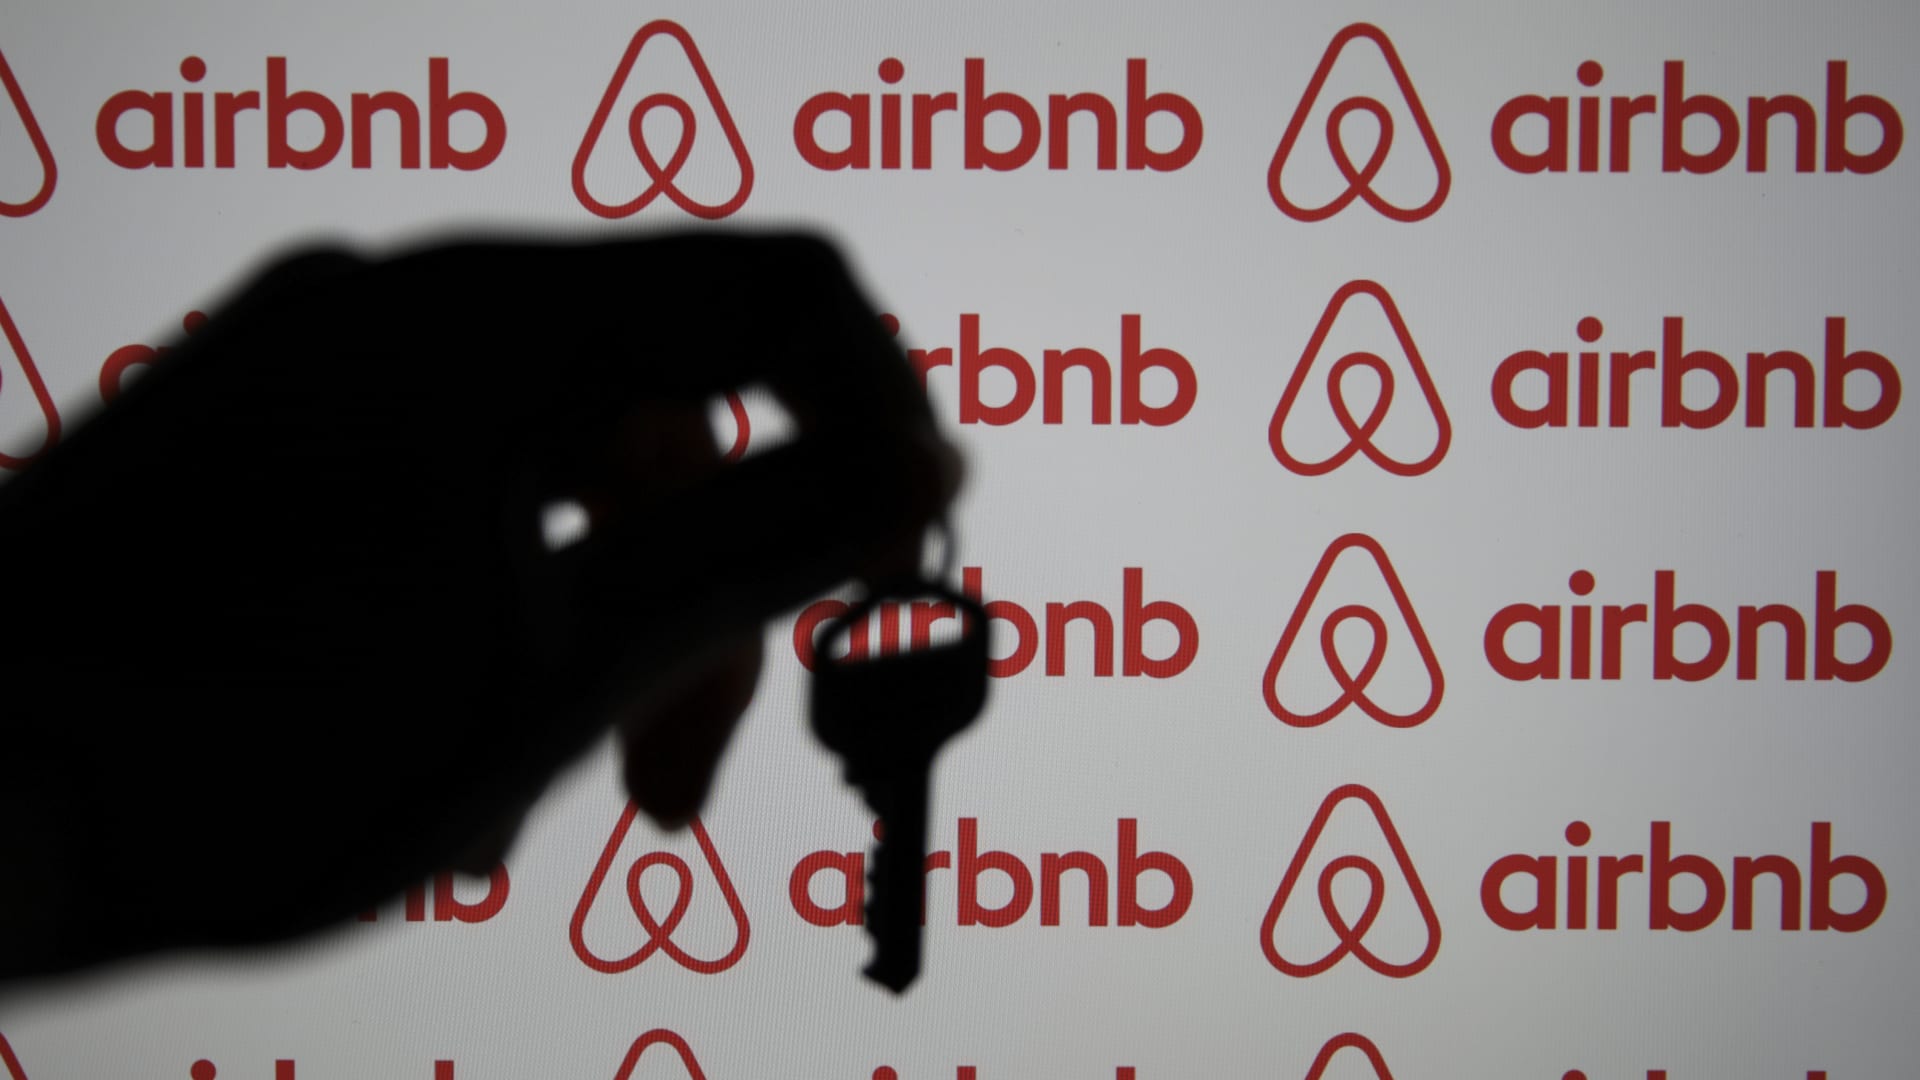 Stocks making the biggest moves after hours: Airbnb, Robinhood, Arm Holdings, Equinix and more